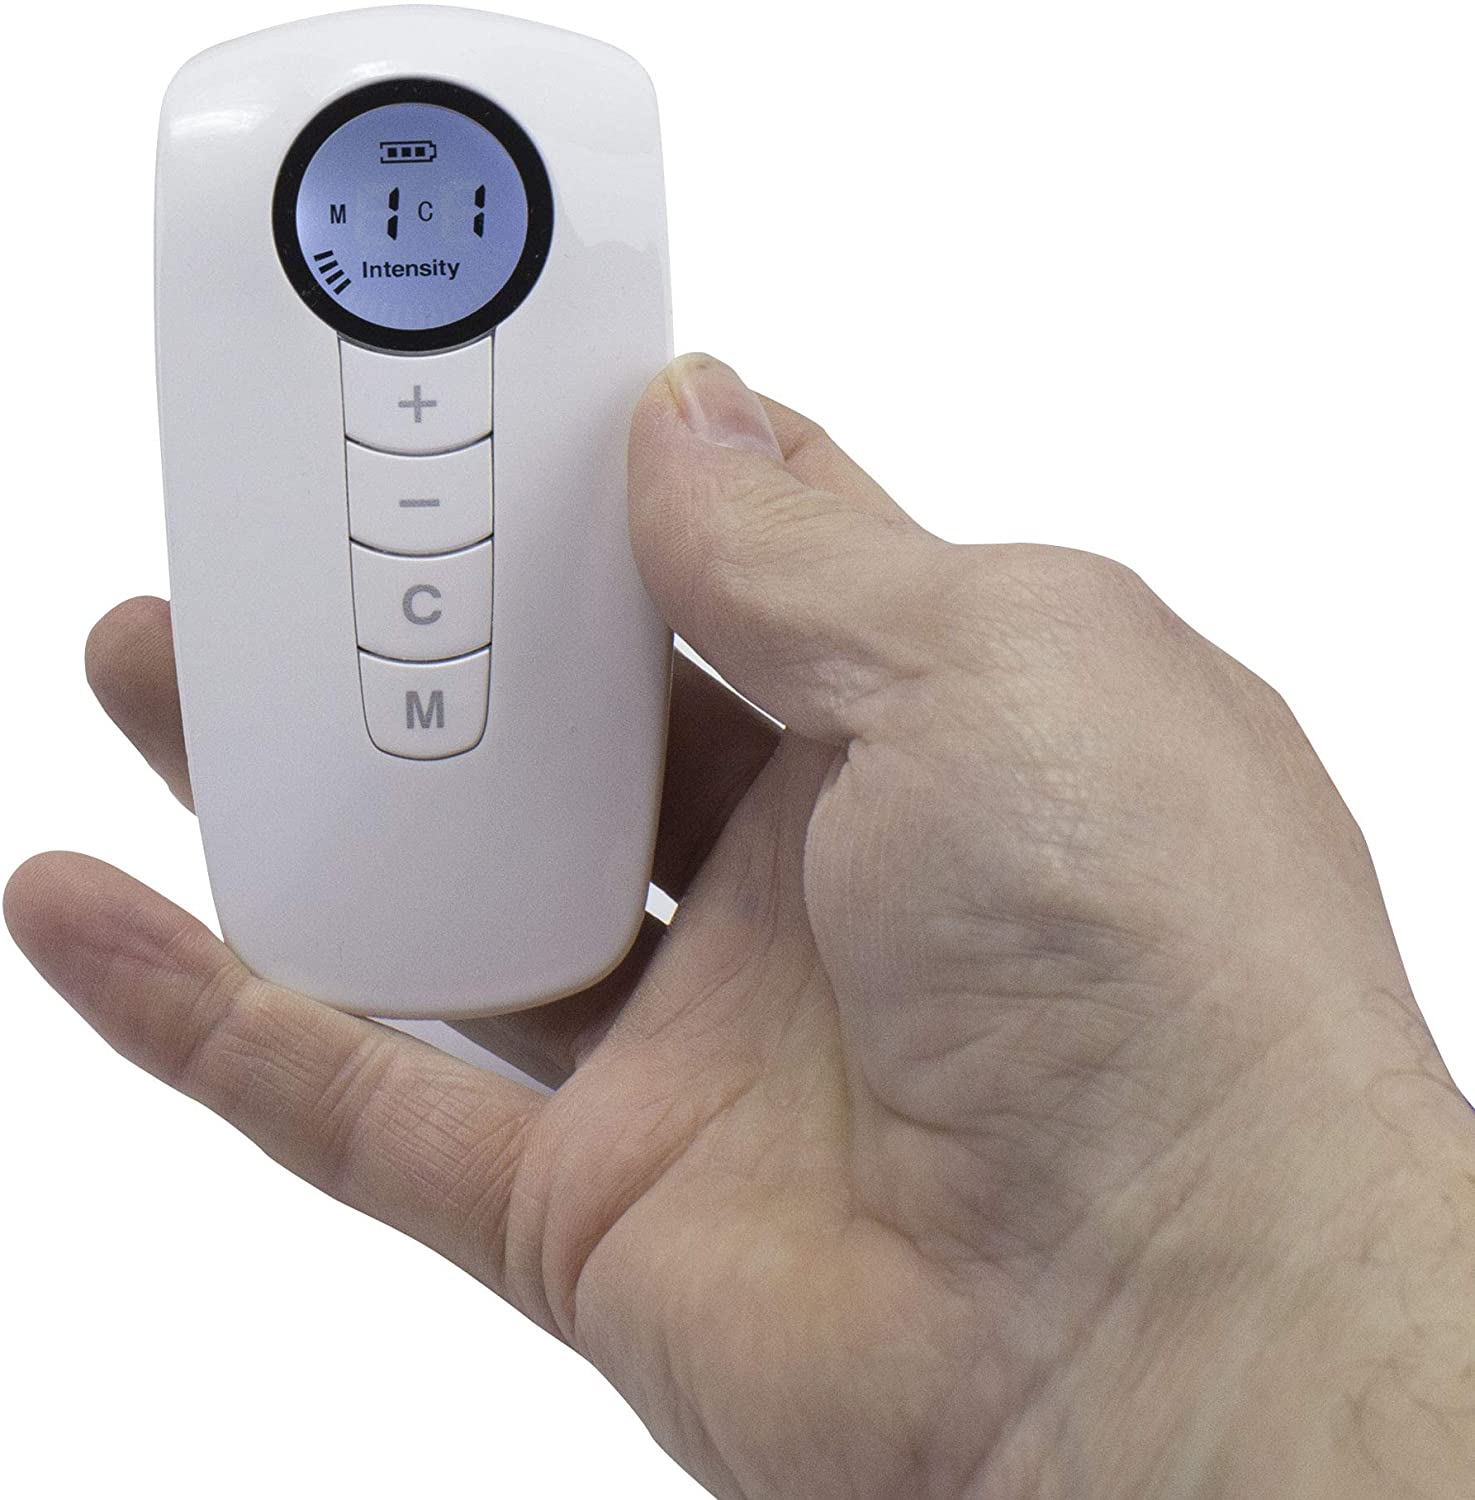 HiDow Spot Muscle Stimulator - Wireless and Rechargeable